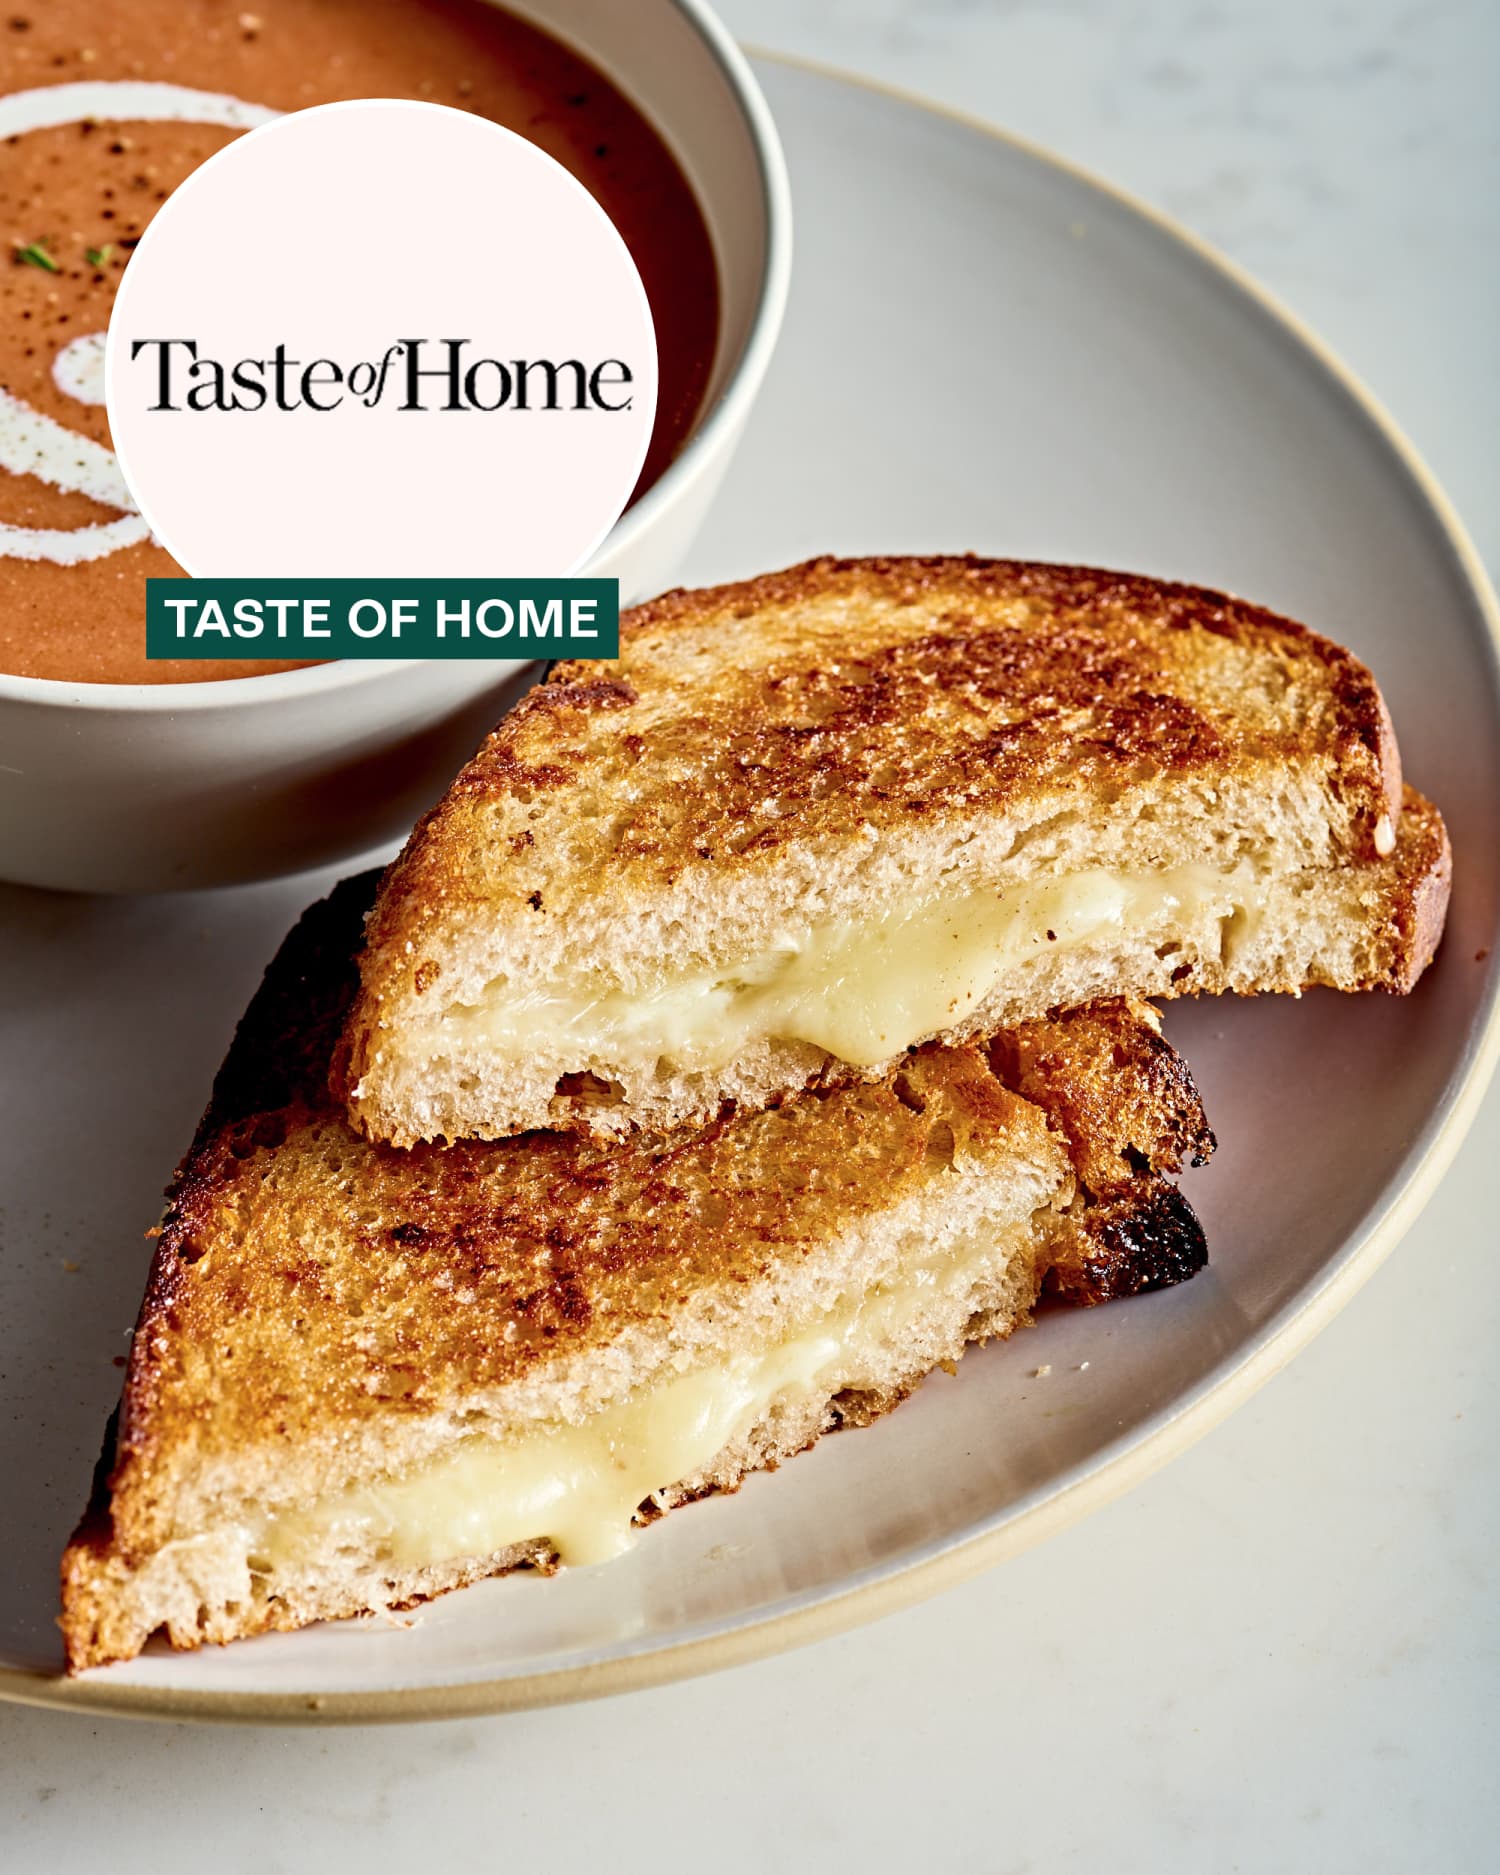 Would Taste of Home’s 5-Cheese Grilled Cheese Live Up to Its Hype? I Tried It to Find Out.